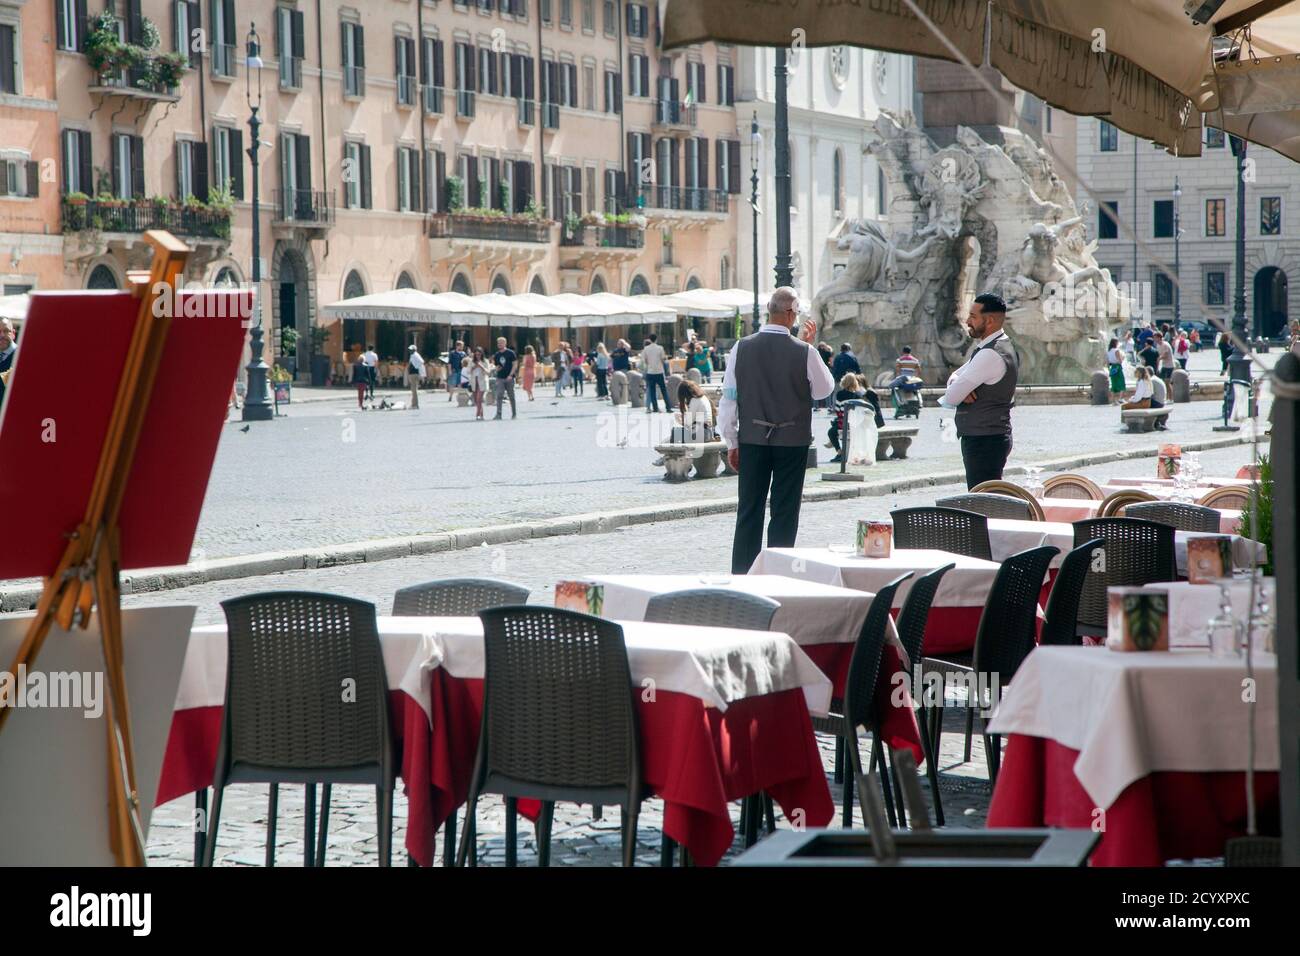 ROME, ITALY - OCTOBER 01 2020: Waiters wait for customers outside a restaurant in Navonas square in Rome. Italy's economy is forecast to shrink 9% this year. Stock Photo